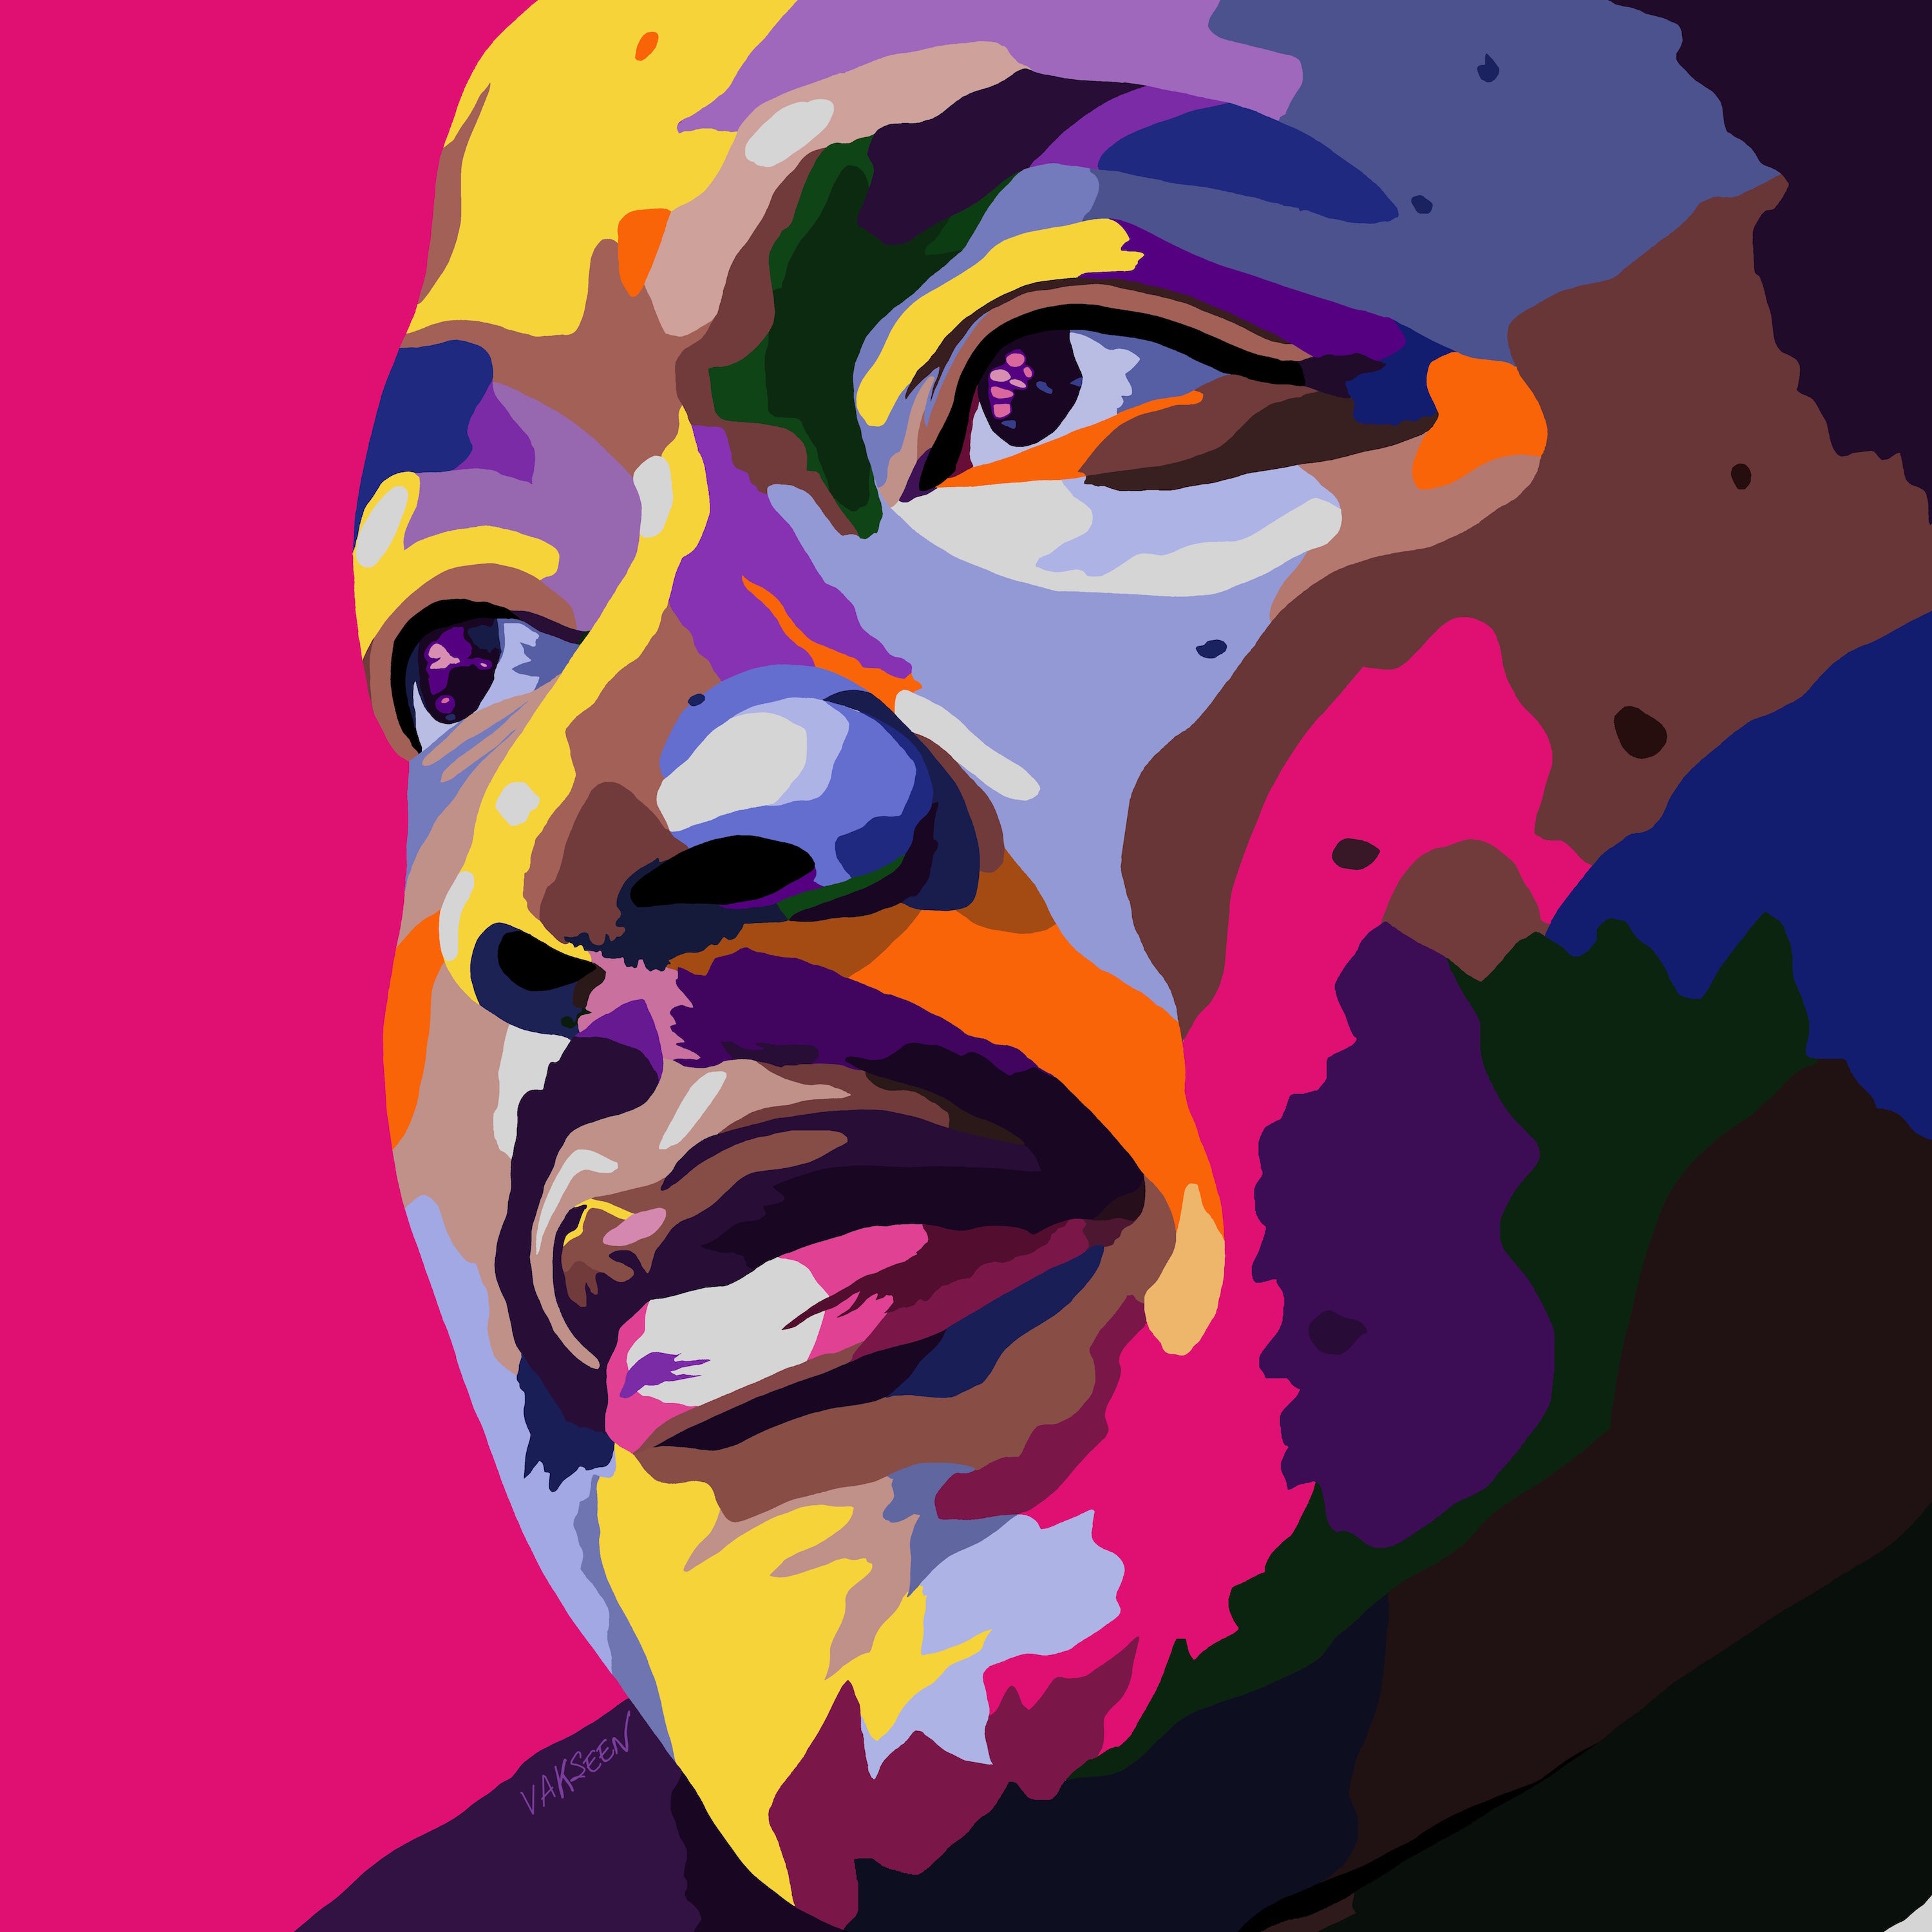 DREAM Martin Luther King Jr. portrait art Limited Edition Giclee A